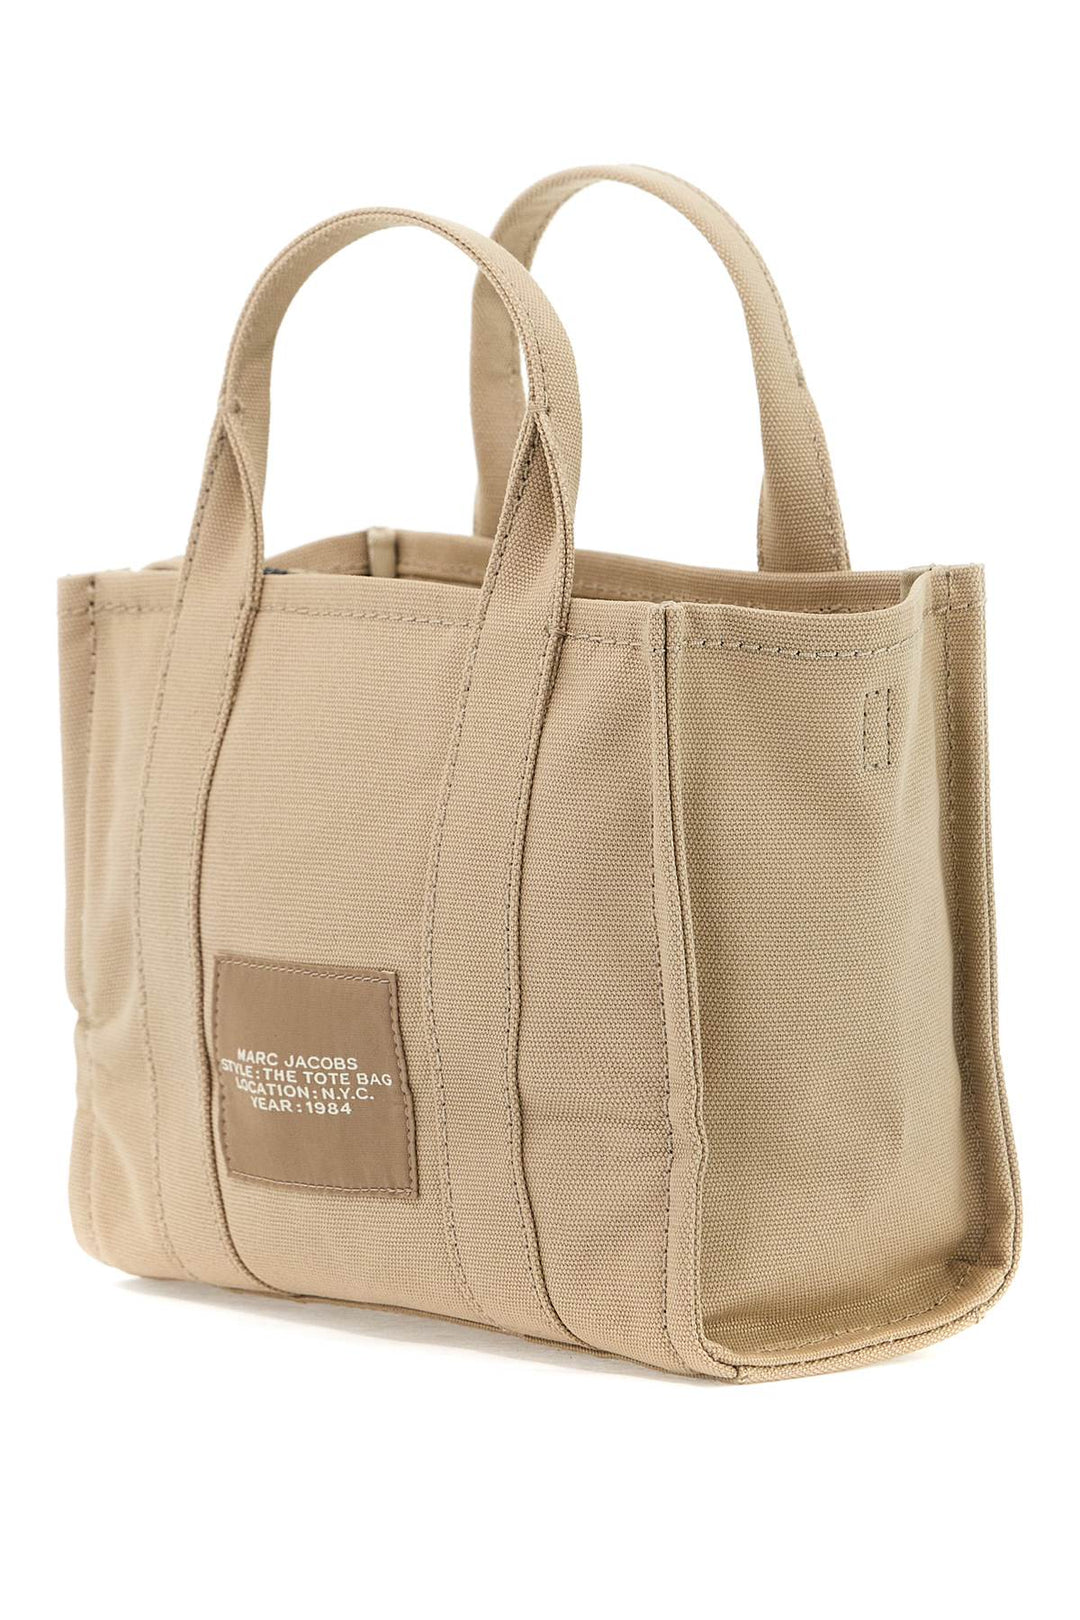 Marc Jacobs The Small Tote Bag   Beige